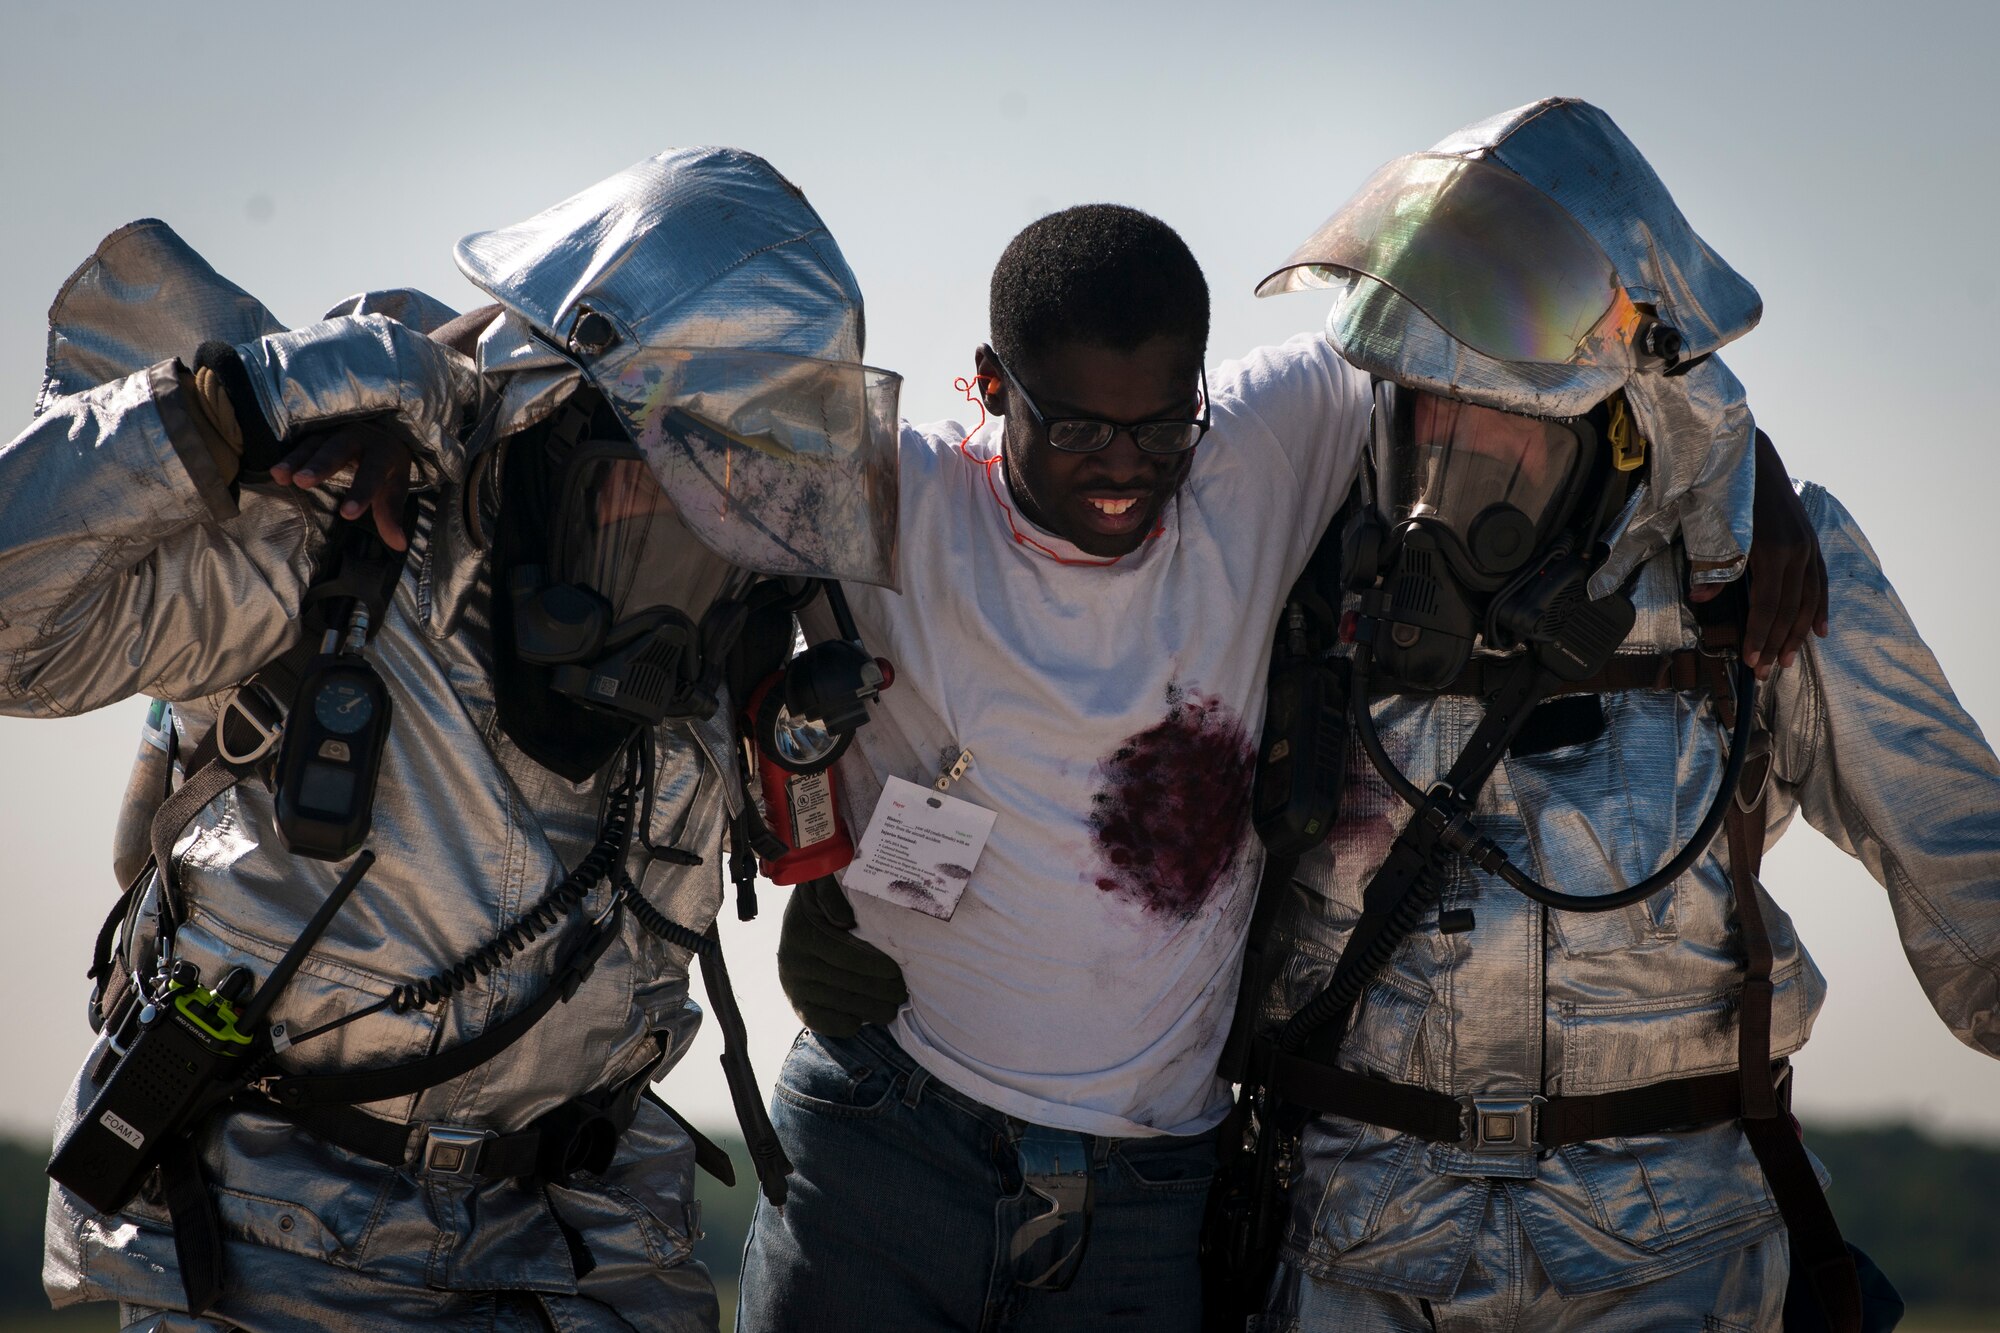 Senior Airman Christopher Springs, exercise volunteer, gets carried off the flight line on Joint Base Andrews, Md., during an emergency-readiness exercise Aug. 13, 2015. Exercise volunteers with mock injuries role-played during the exercise to create a realistic training environment. (U.S. Air Force photo/Airman 1st Class Philip Bryant)